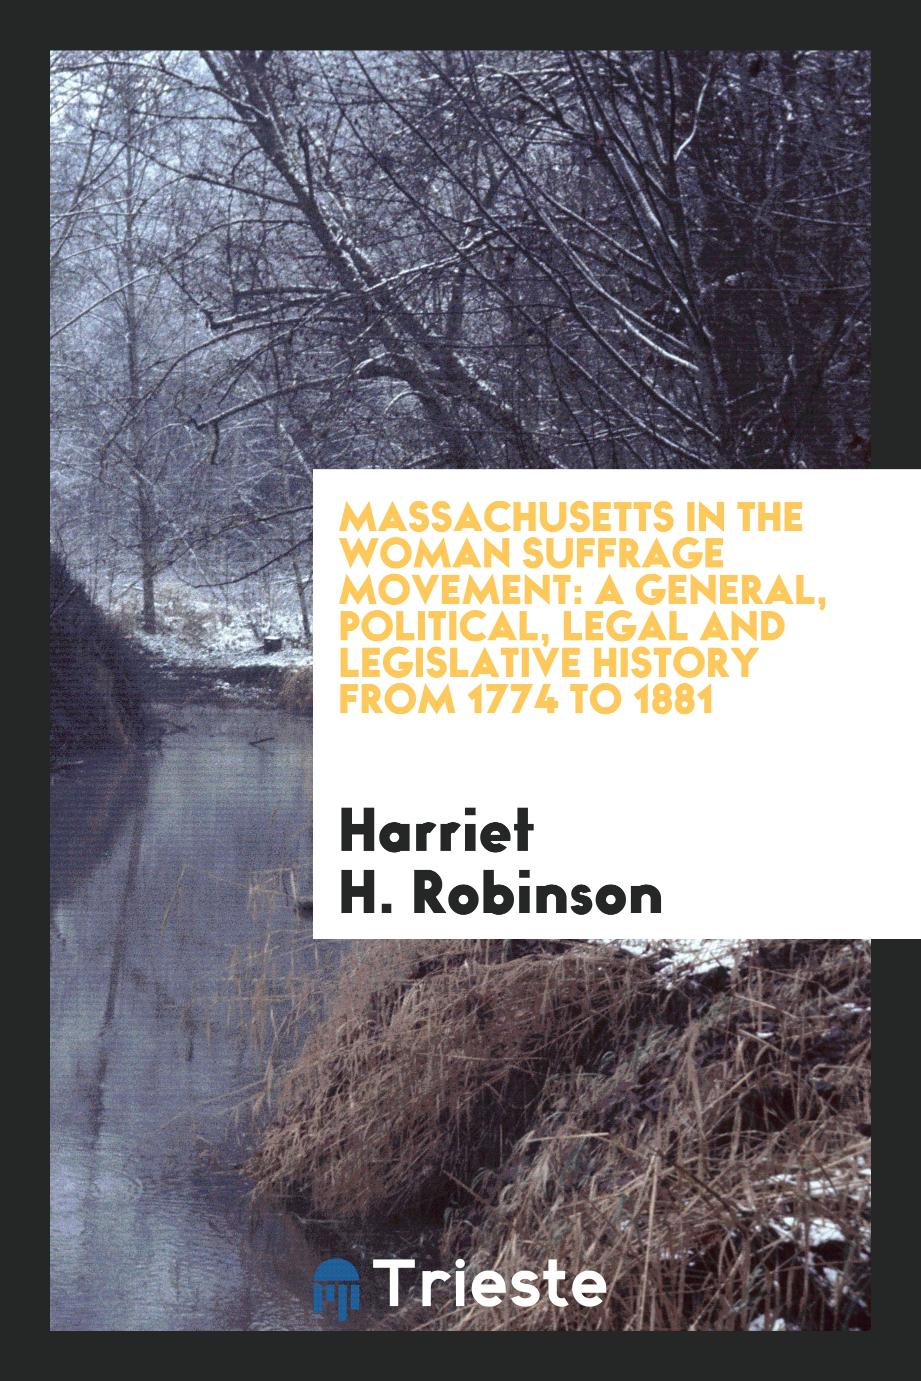 Massachusetts in the woman suffrage movement: a general, political, legal and legislative history from 1774 to 1881